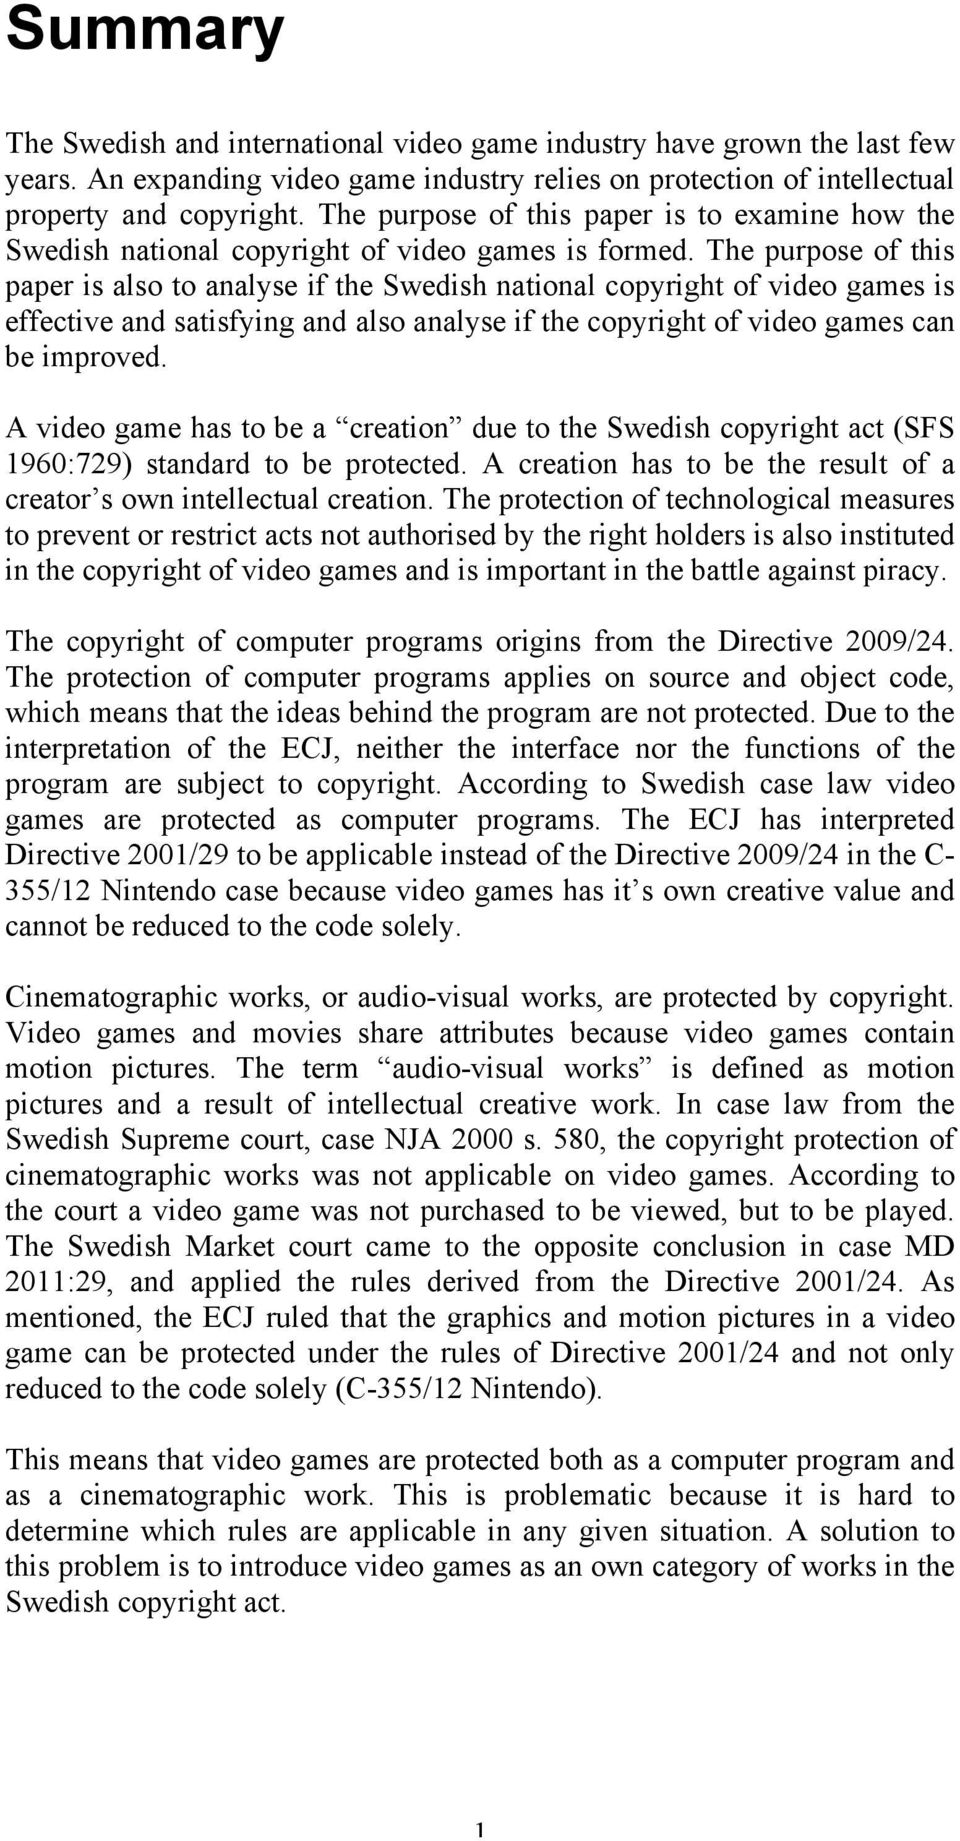 The purpose of this paper is also to analyse if the Swedish national copyright of video games is effective and satisfying and also analyse if the copyright of video games can be improved.